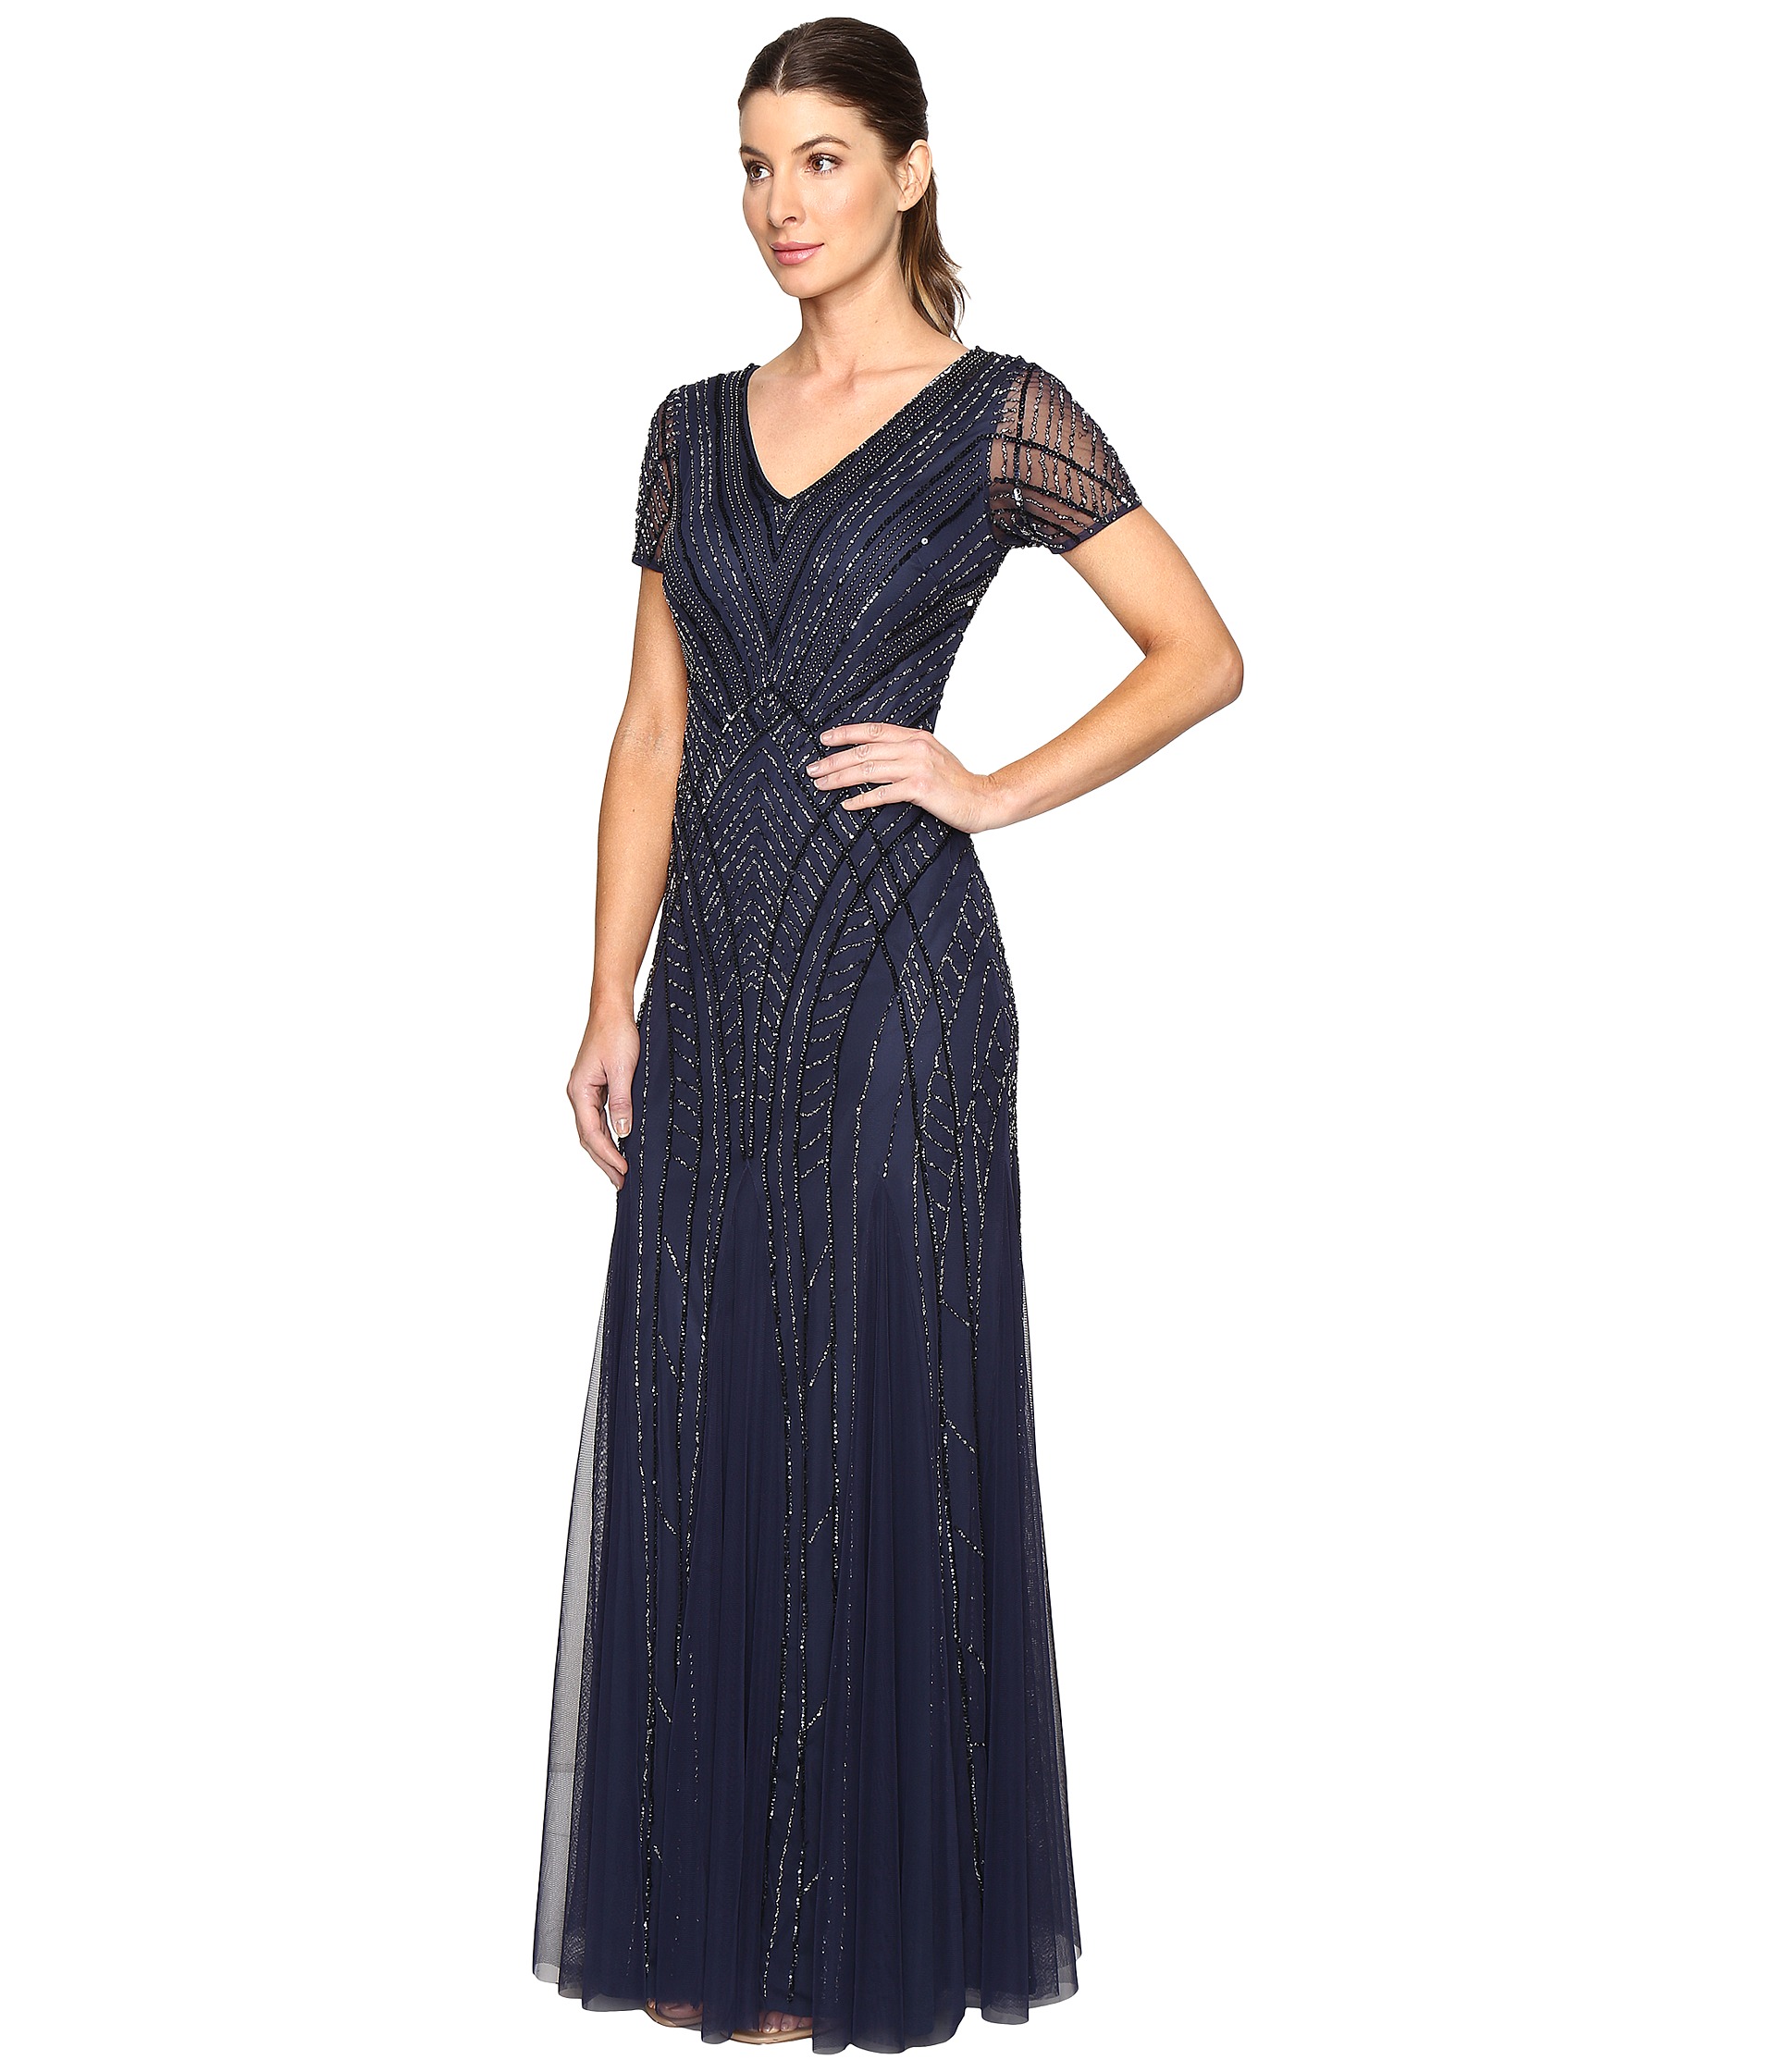 Adrianna Papell Short Sleeve Illusion Neck Beaded Gown at Zappos.com